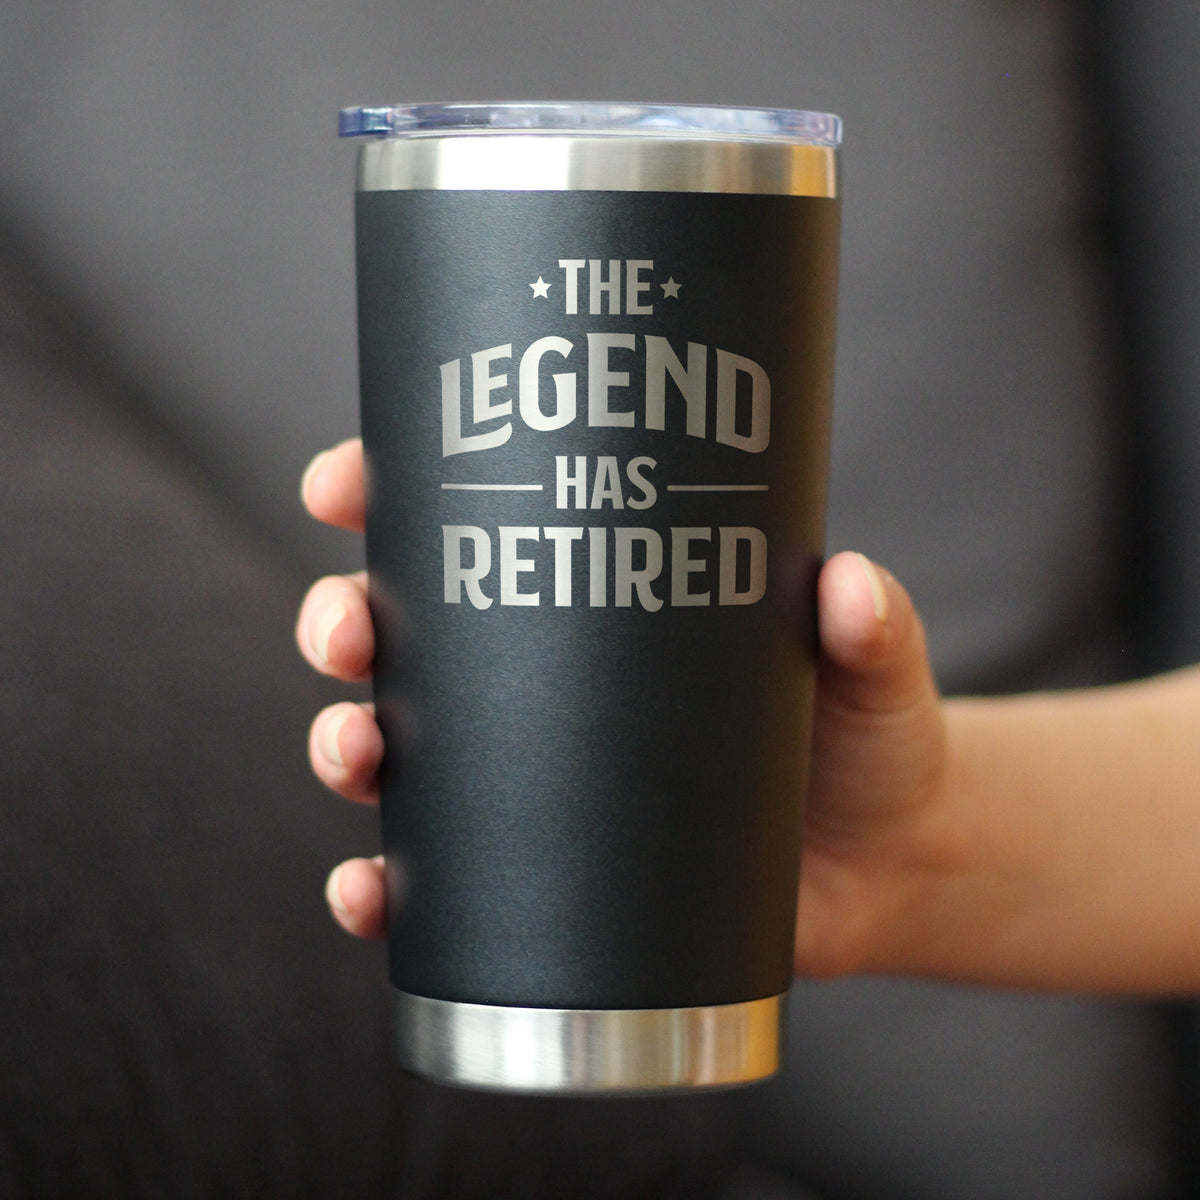 The Legend Has Retired - Insulated Coffee Tumbler Cup with Sliding Lid - Stainless Steel Insulated Mug - Funny Retirement Gifts for Boss or Coworkers